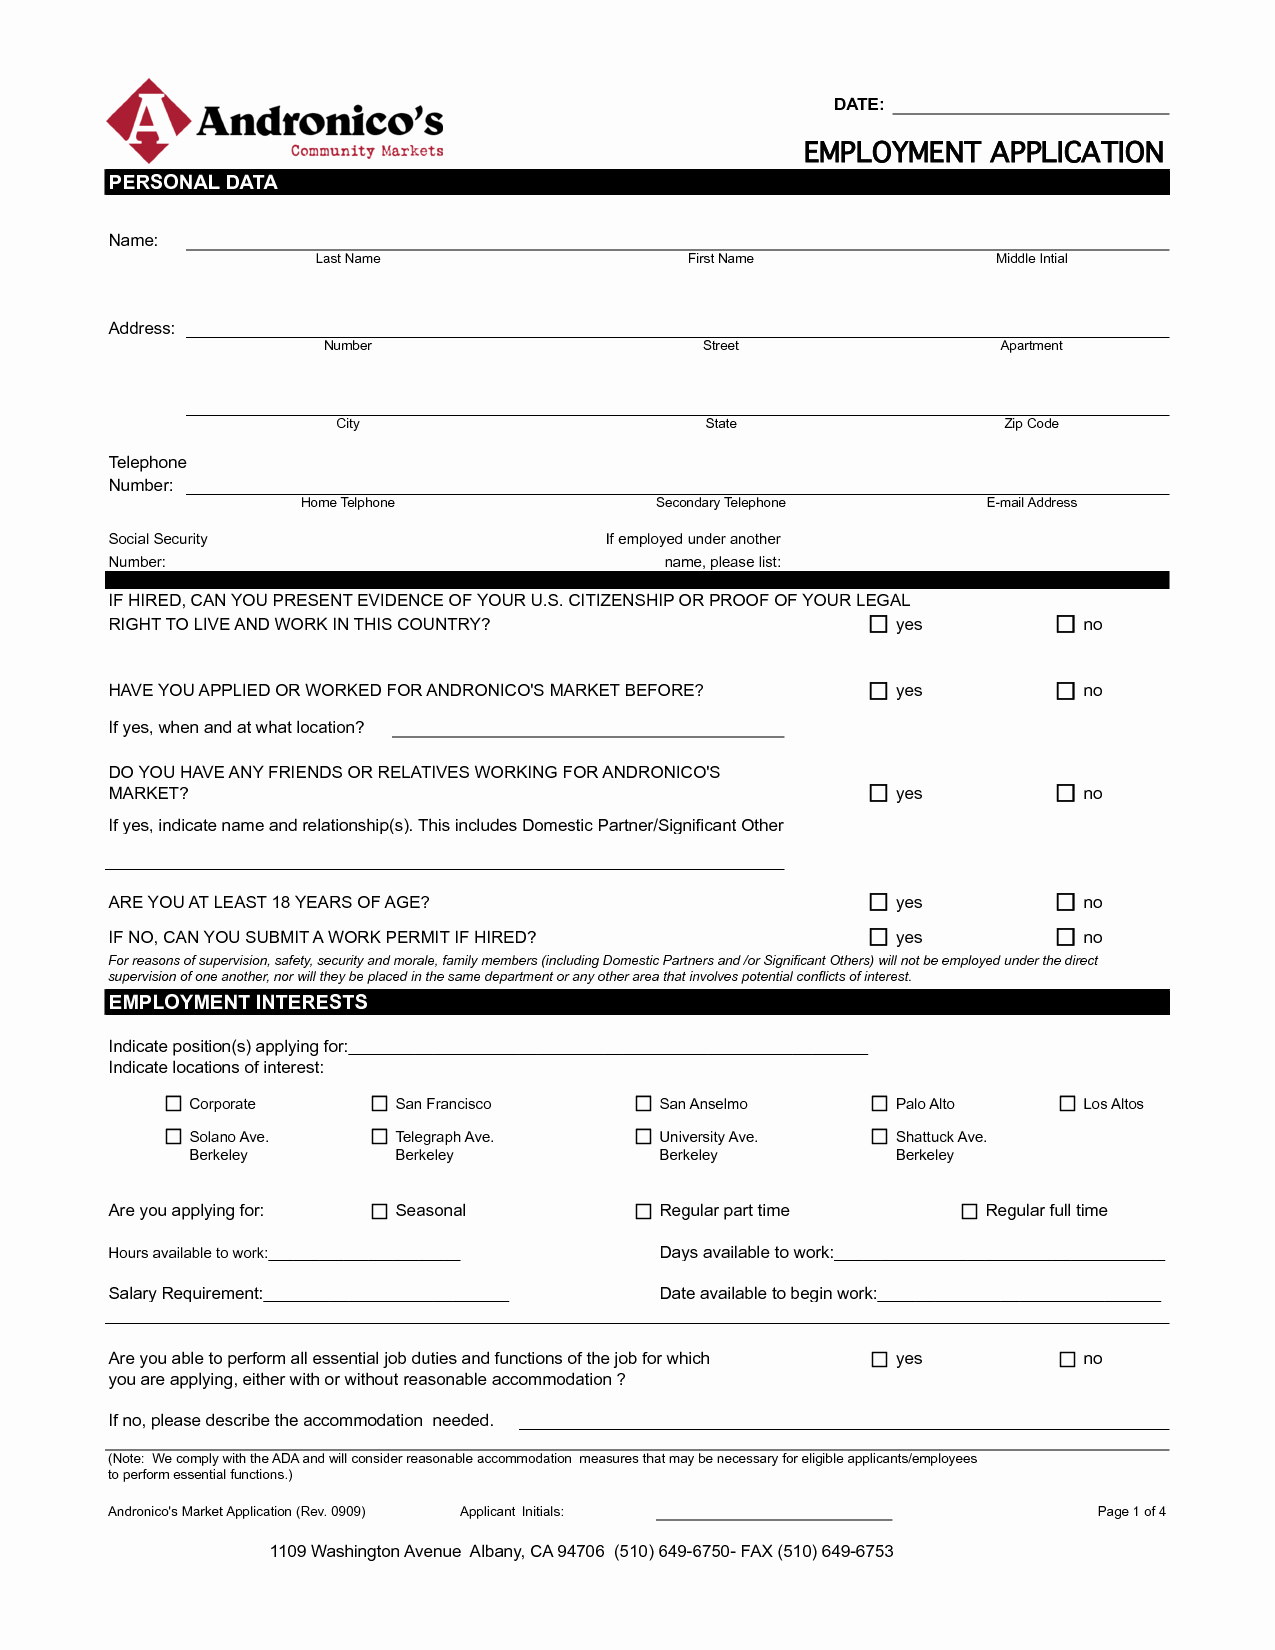 Free Employment Application form Download Lovely Job Application Template form Free Job